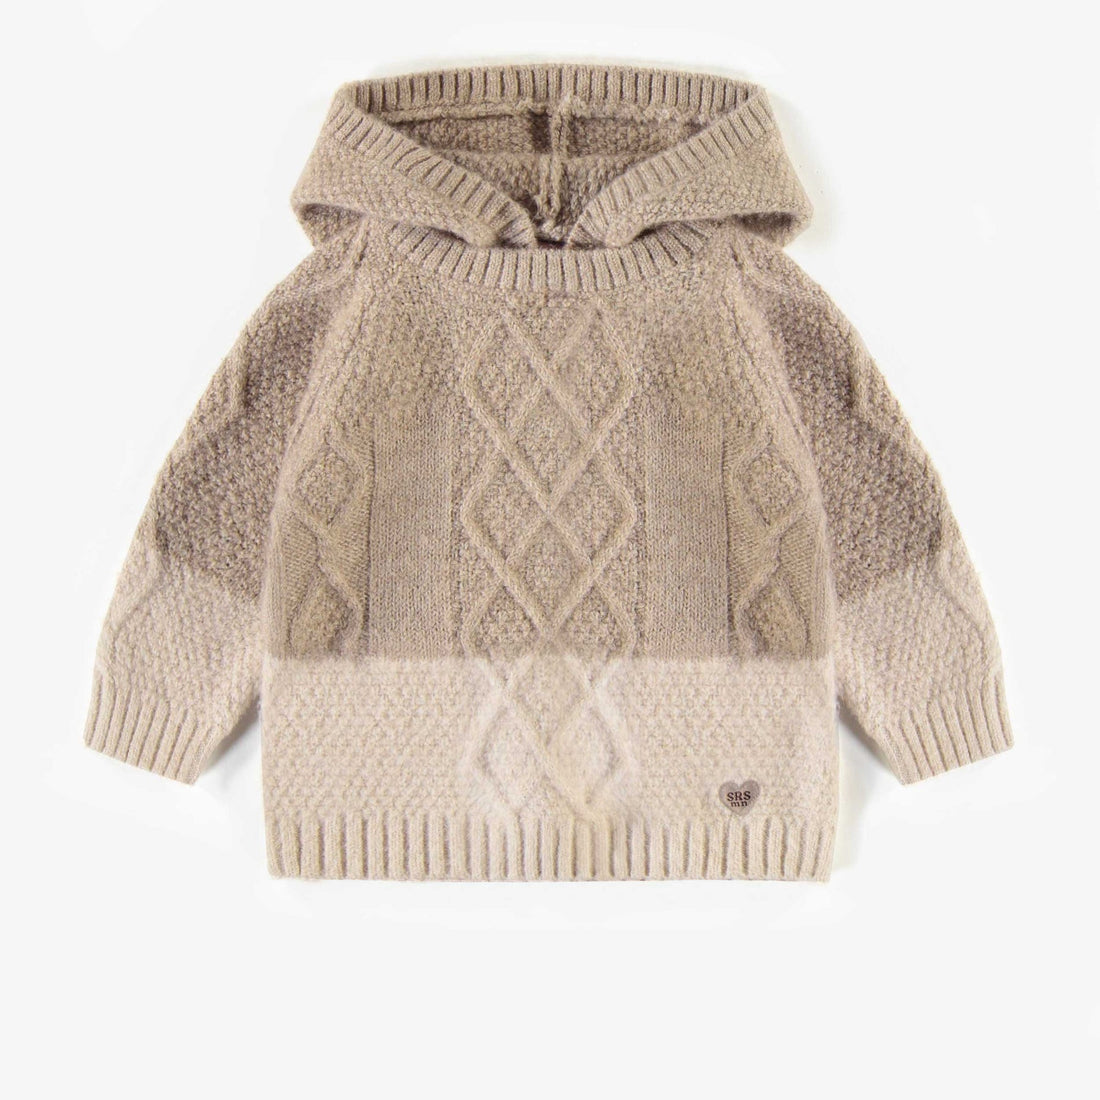 RECYCLED POLYESTER KNITTED HOODIE, BABY